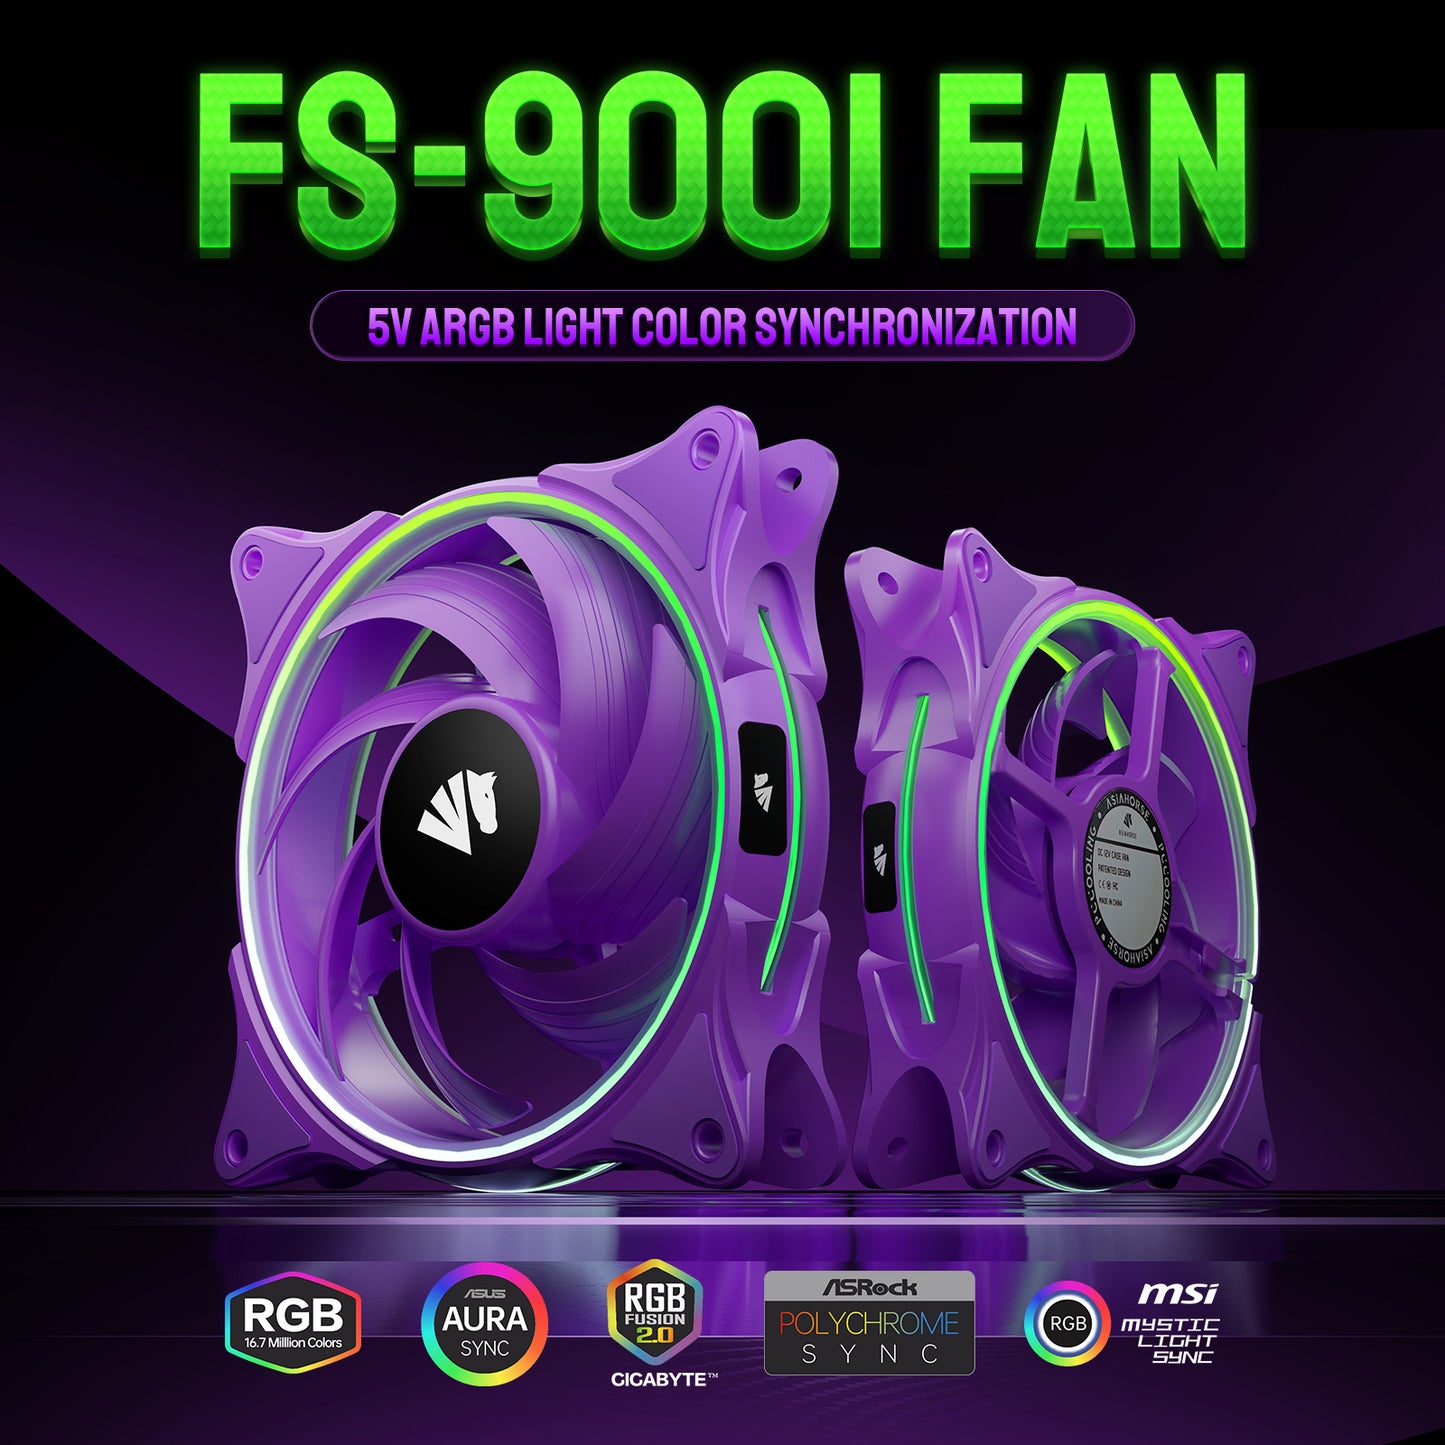 Asiahorse FS-9001 Pwm RGB Case Fan,3 Pack Purple 120mm Pc Fan,Quiet Computer Fan for PC case and CPU Cooler,5V ARGB Motherboard SYNC/RC Controller,DIY Colorful Mode Adjustable with Fan Control Remote